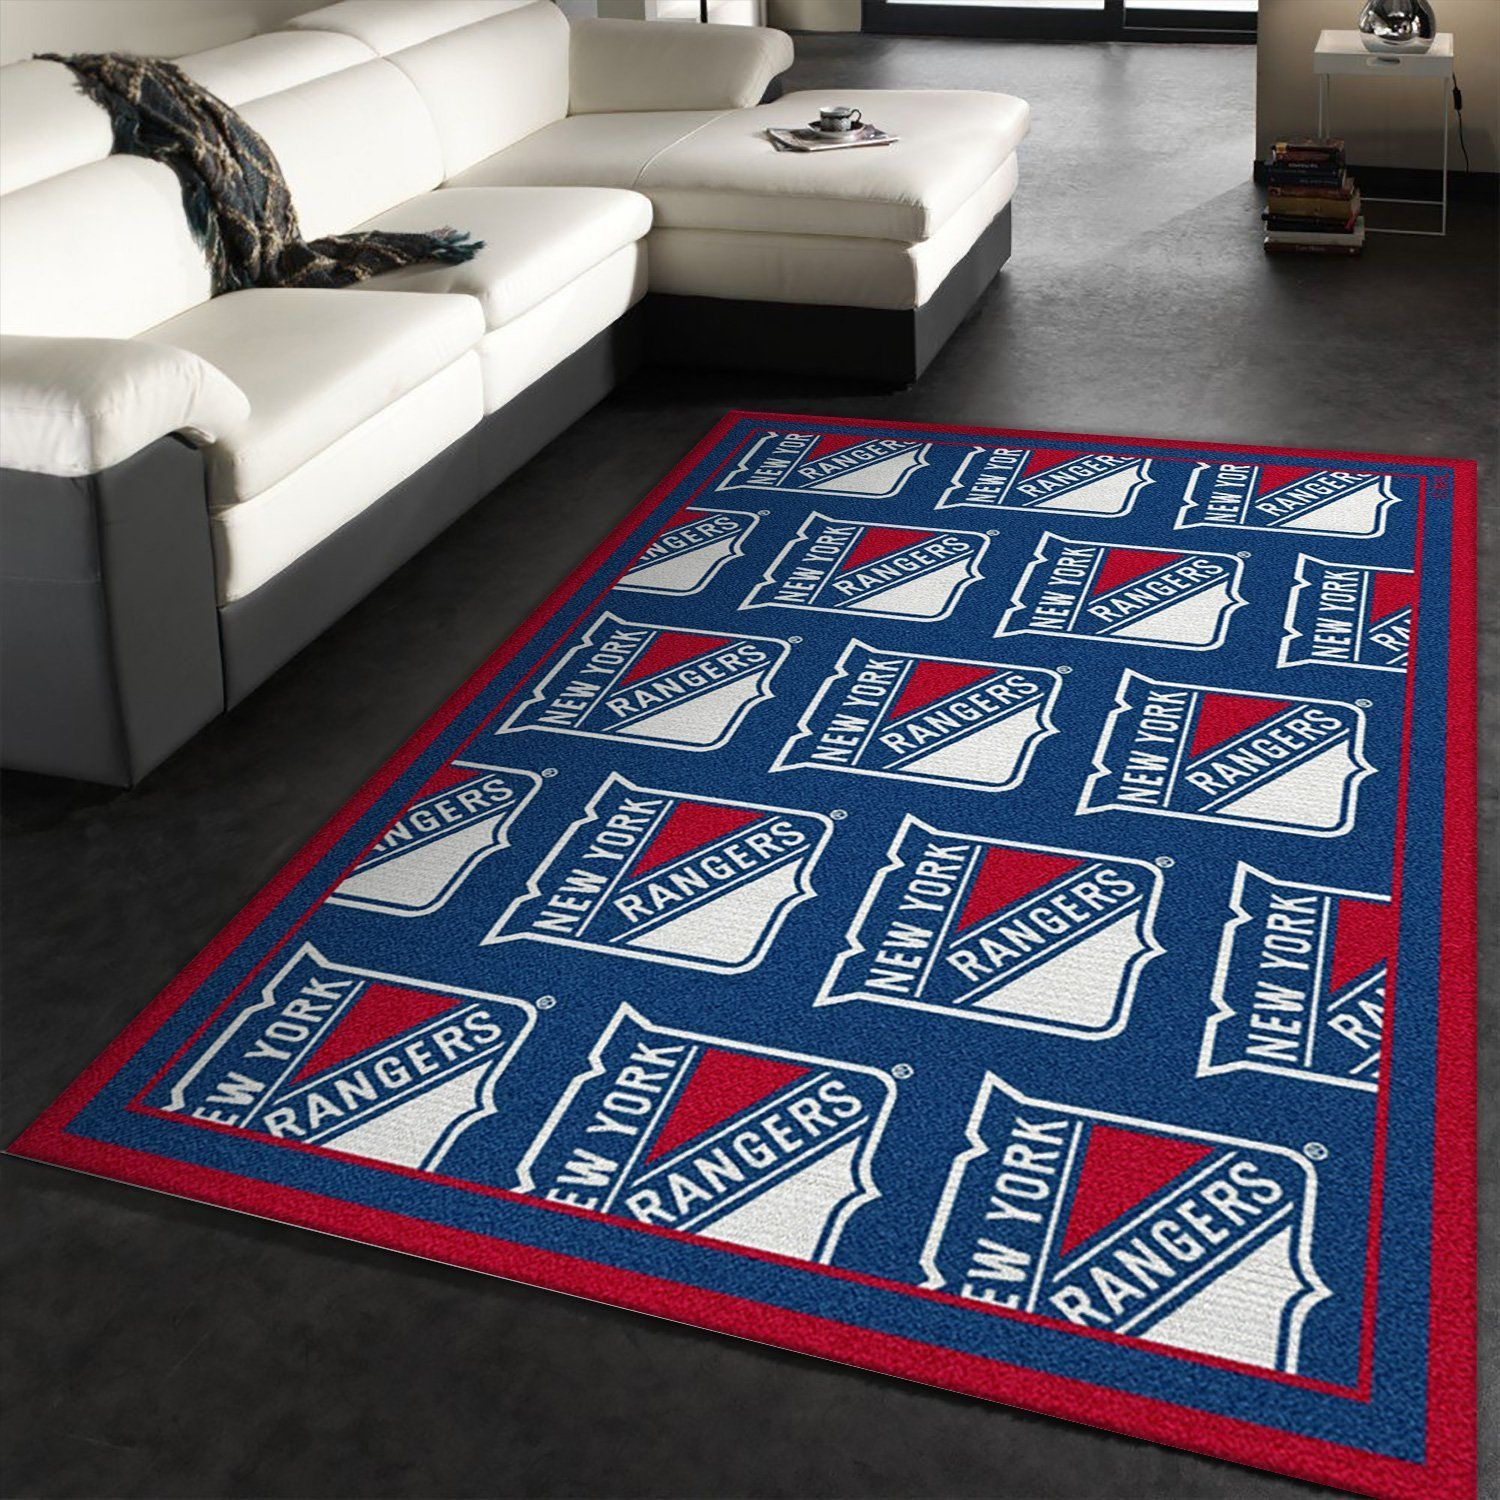 Nhl Repeat New York Rangers Area Rug, Living Room Rug, Home US Decor - Indoor Outdoor Rugs 1